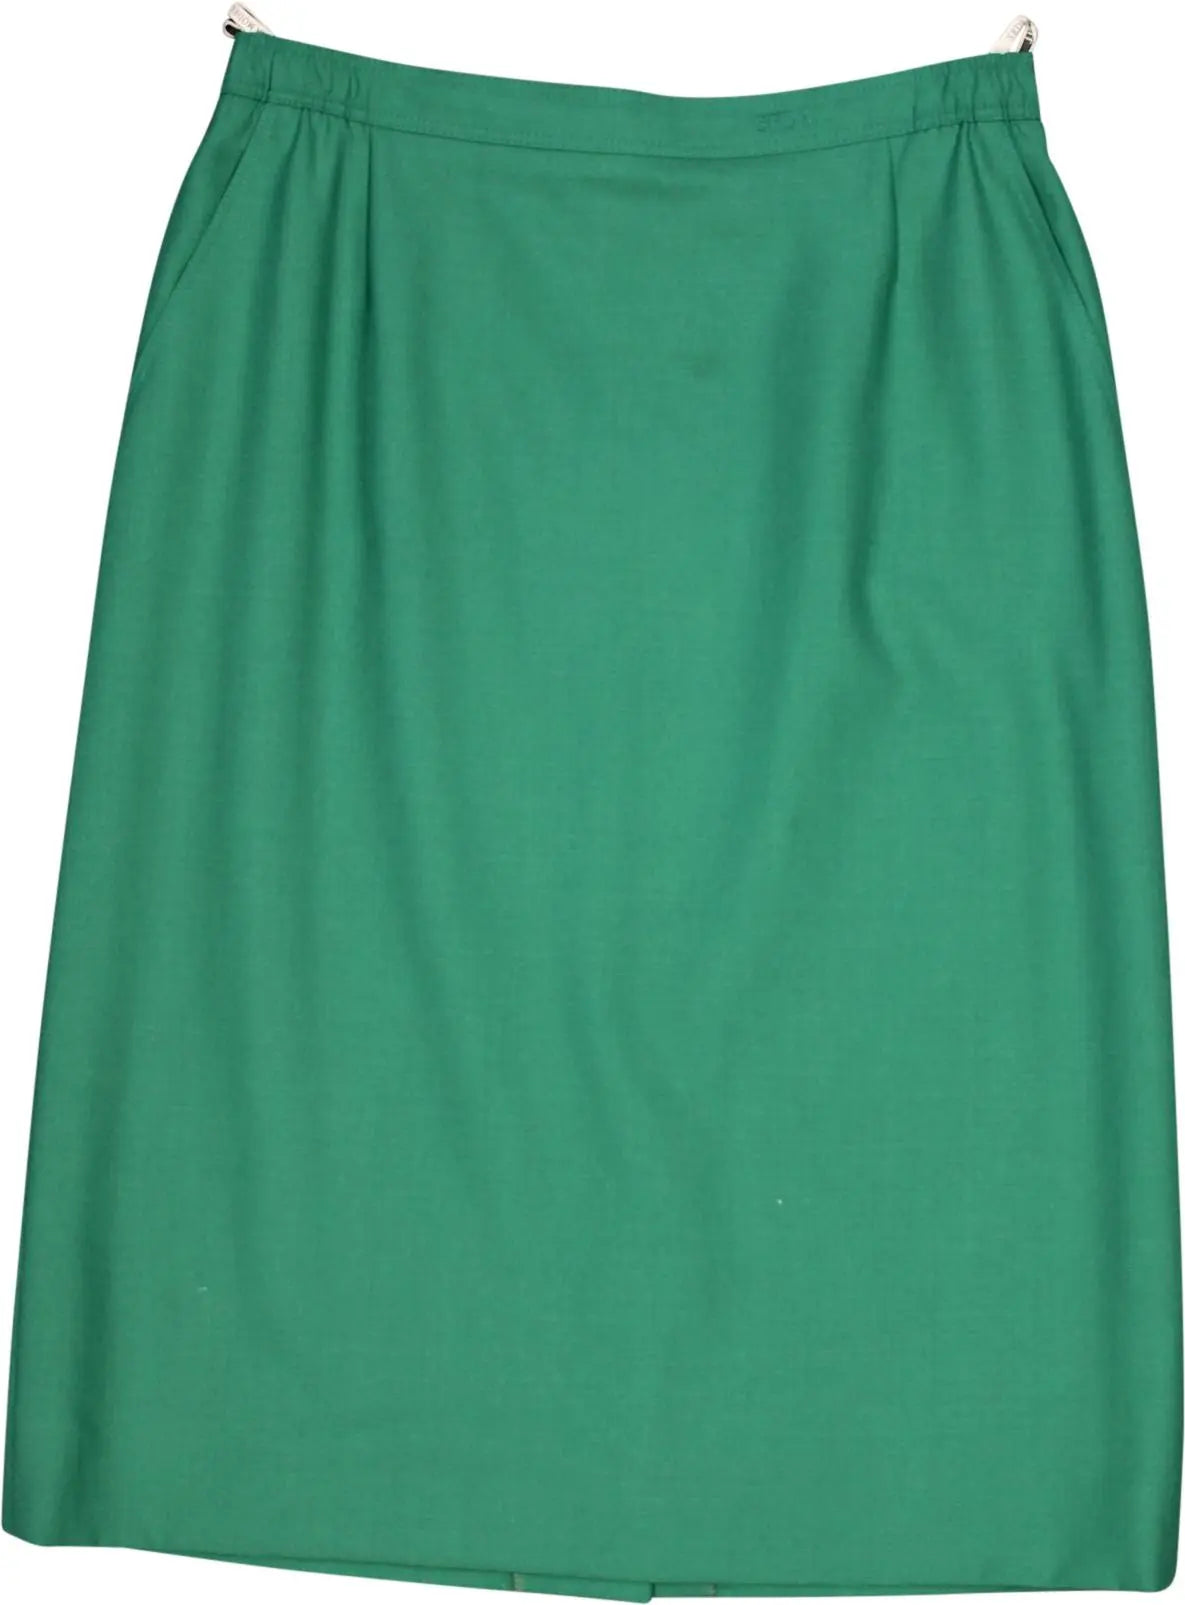 Seda Modell - Green Skirt by Seda Modell- ThriftTale.com - Vintage and second handclothing